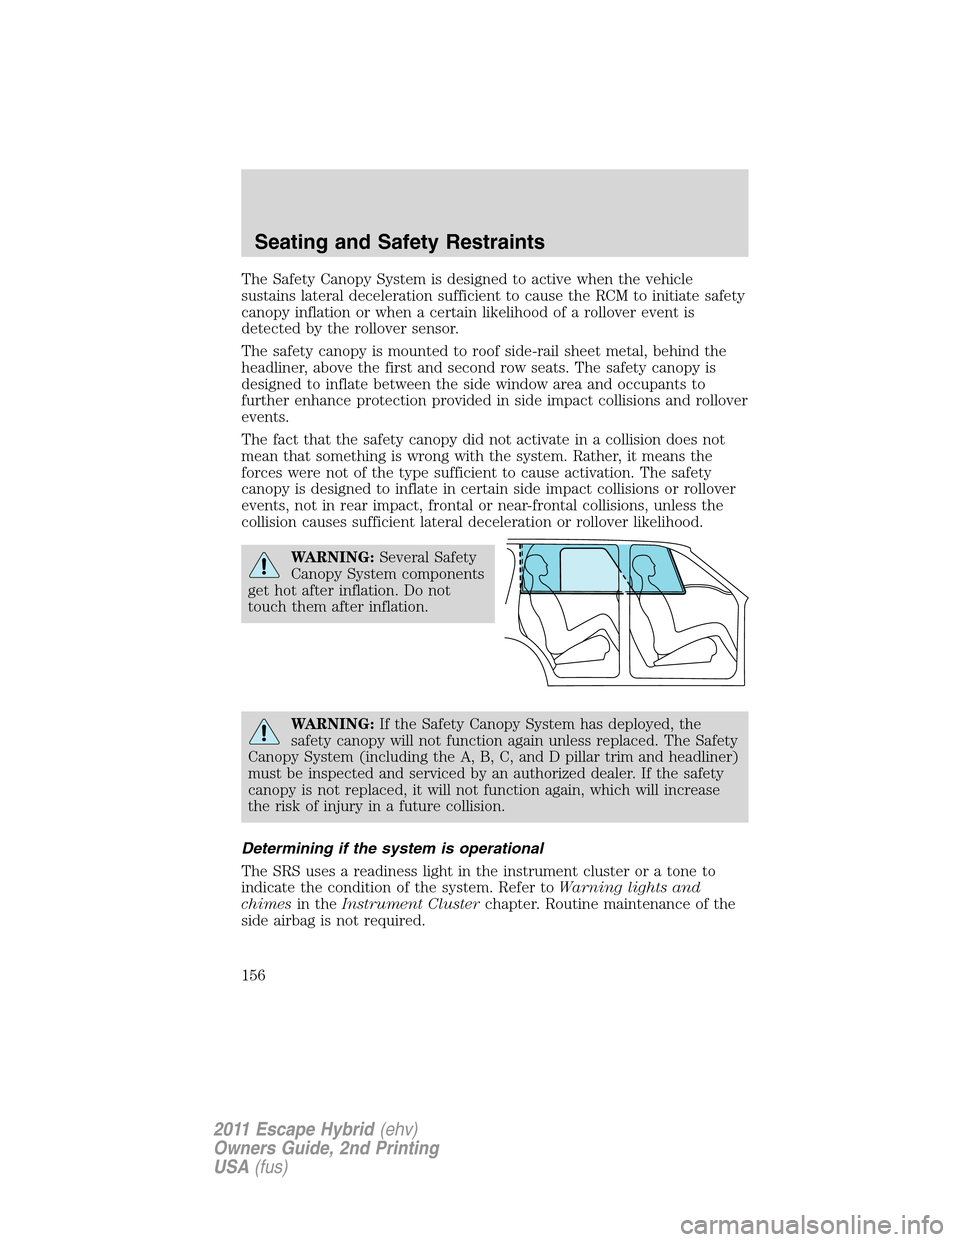 FORD ESCAPE HYBRID 2011 2.G User Guide The Safety Canopy System is designed to active when the vehicle
sustains lateral deceleration sufficient to cause the RCM to initiate safety
canopy inflation or when a certain likelihood of a rollover